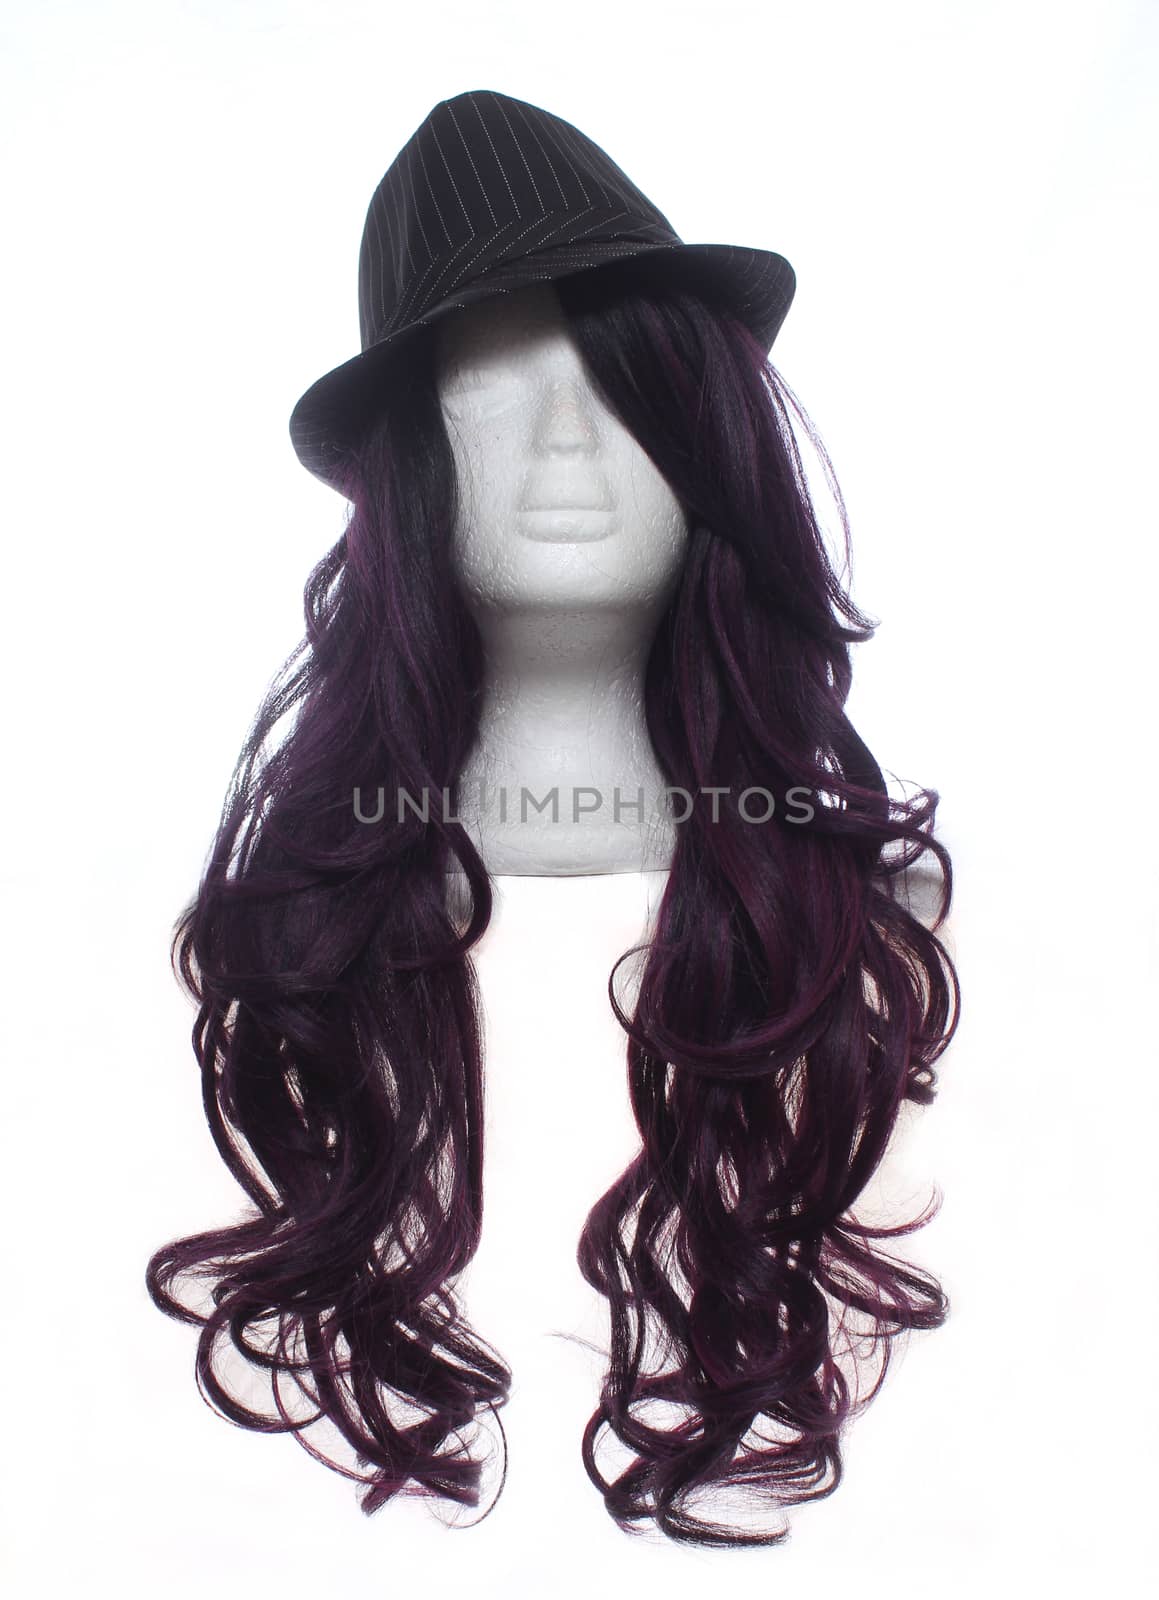 Classic Fedora Hat on Mannequin With Black and Red Wig by Marti157900